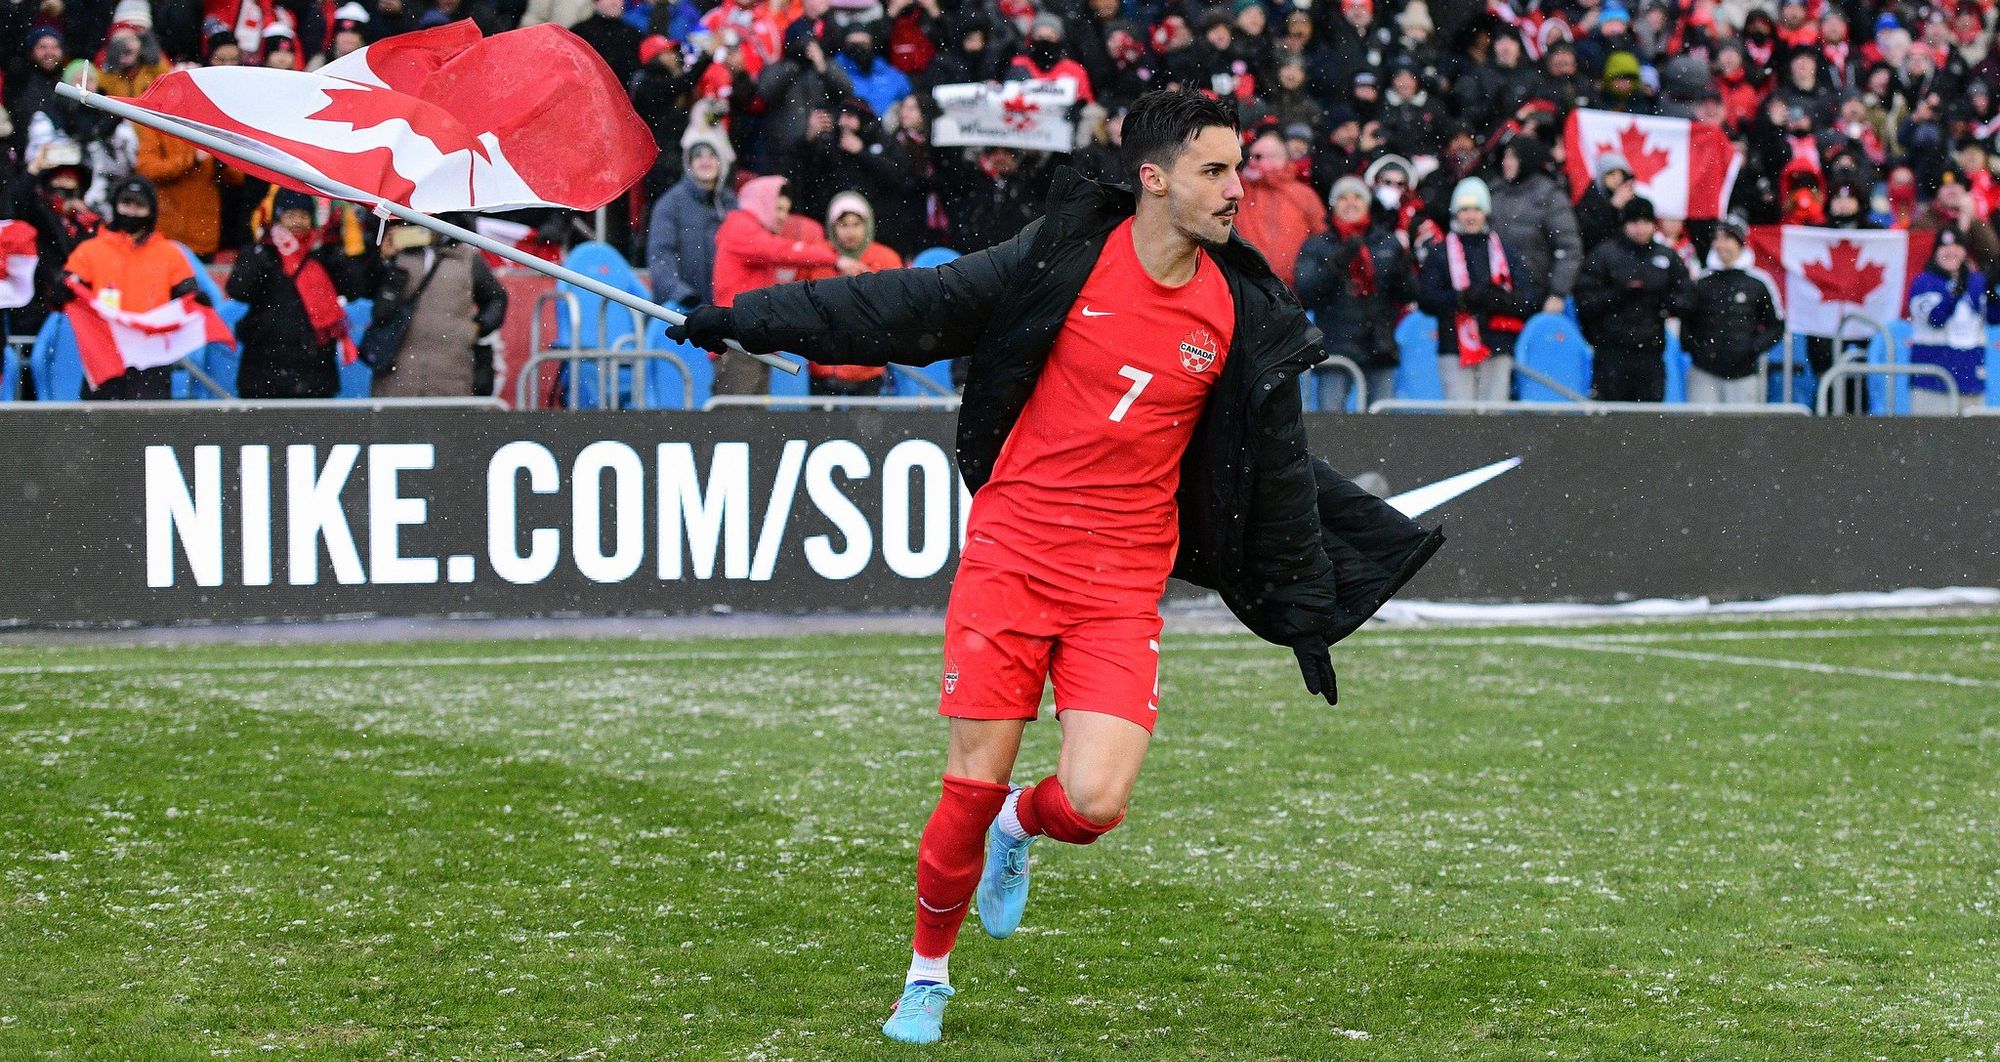 CanMNT Talk: What to expect from Canada in friendly vs. Japan